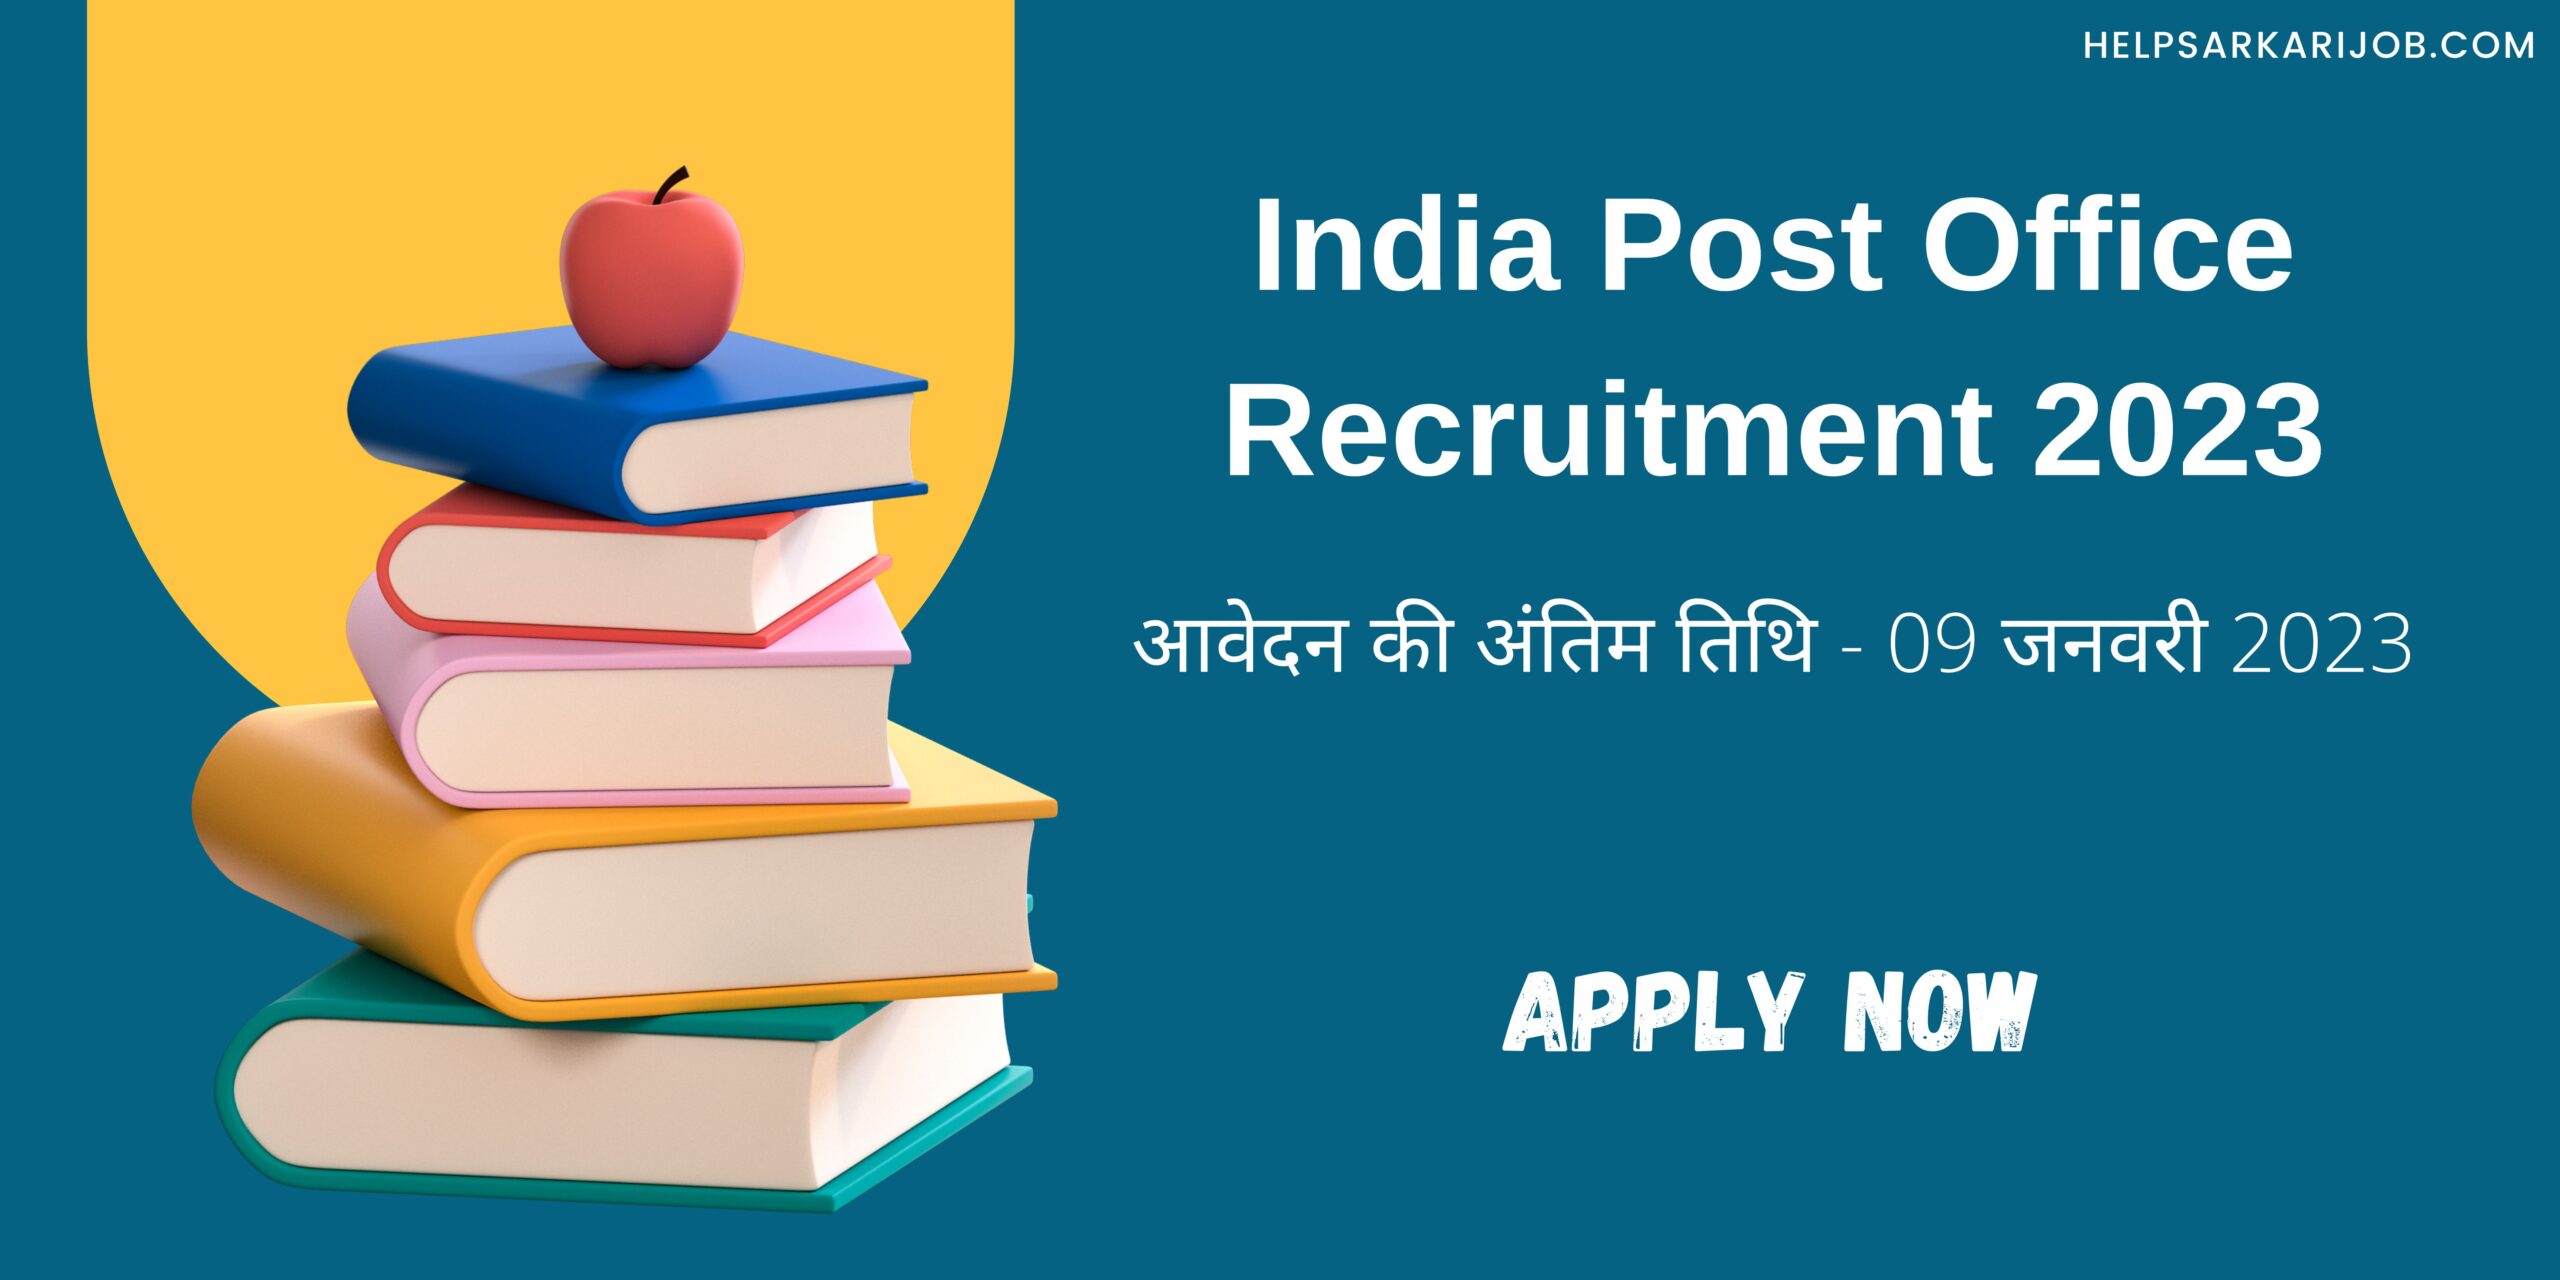 India Post Office Recruitment 2023 Last date to apply